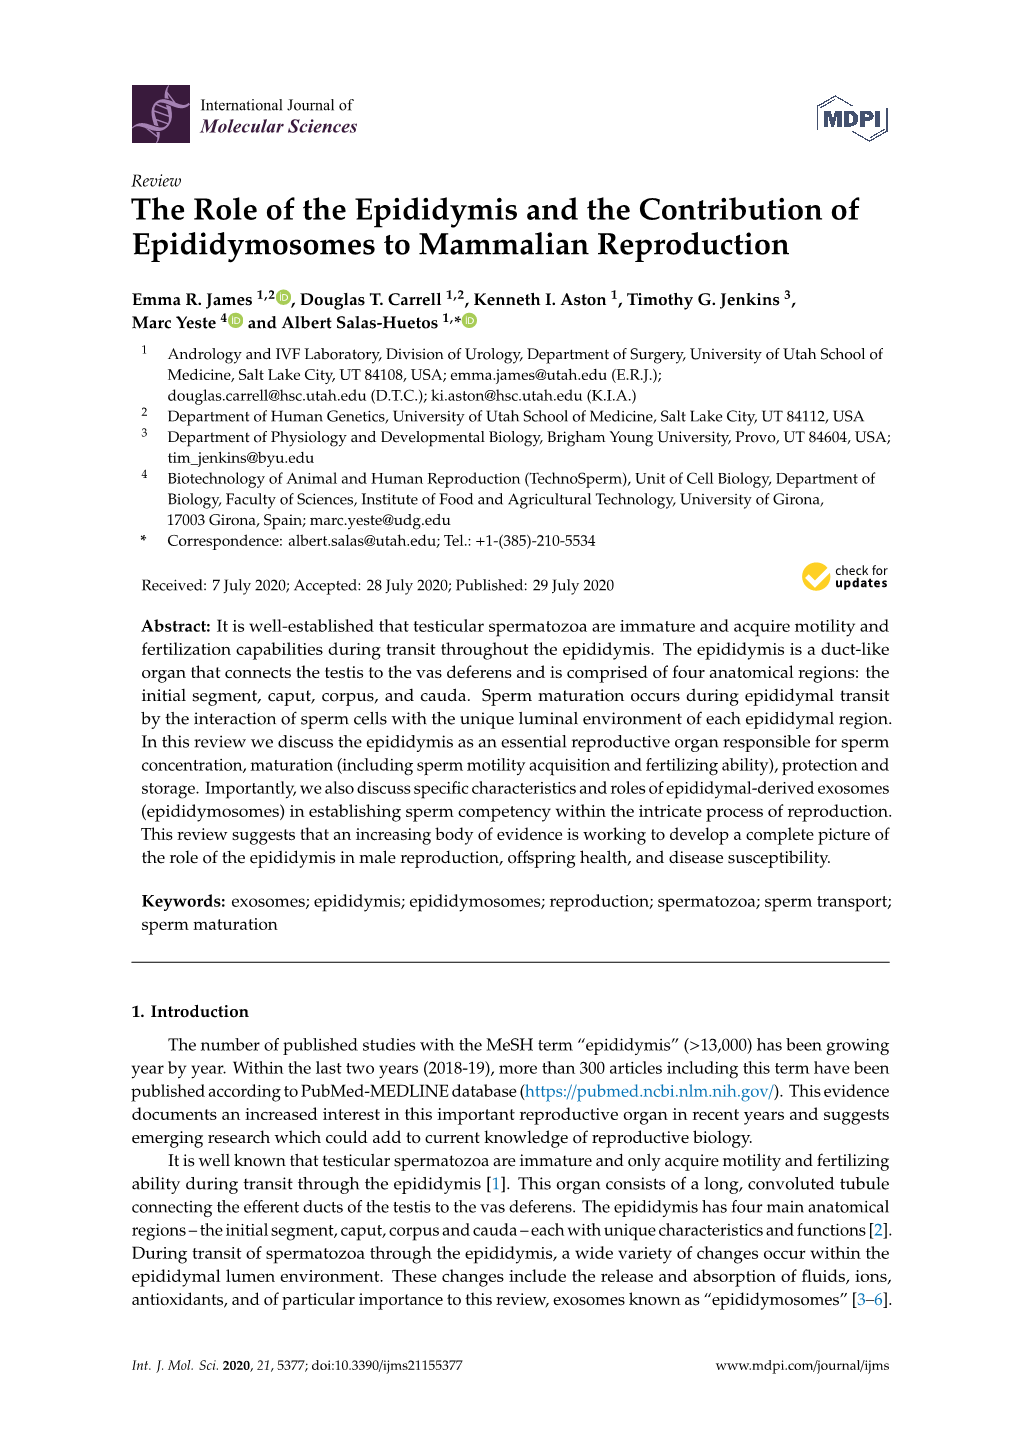 The Role of the Epididymis and the Contribution of Epididymosomes to Mammalian Reproduction